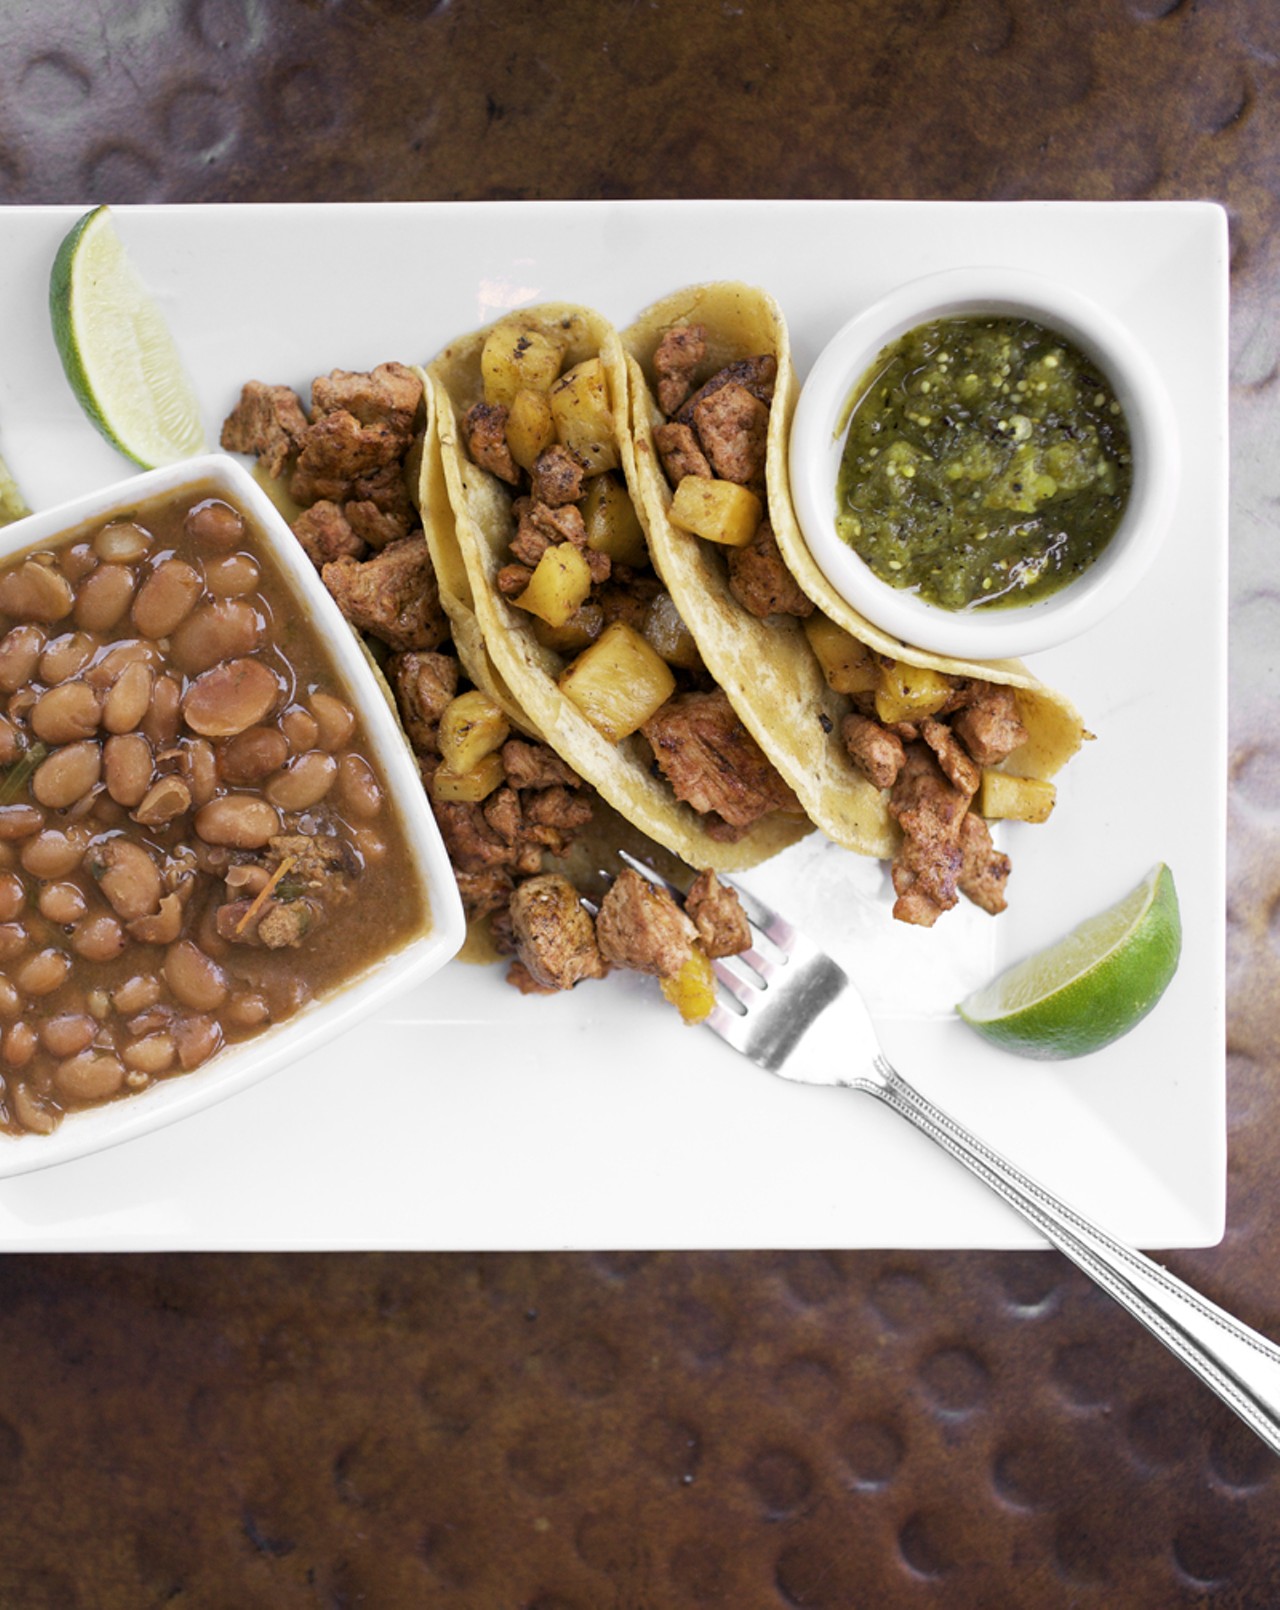 The TACOS al PASTOR are chile marinated pork tenderloin with grilled pineapple and cilantro in homemade corn tortillas, served with salsa verde and a side of Mexican beans and rice.